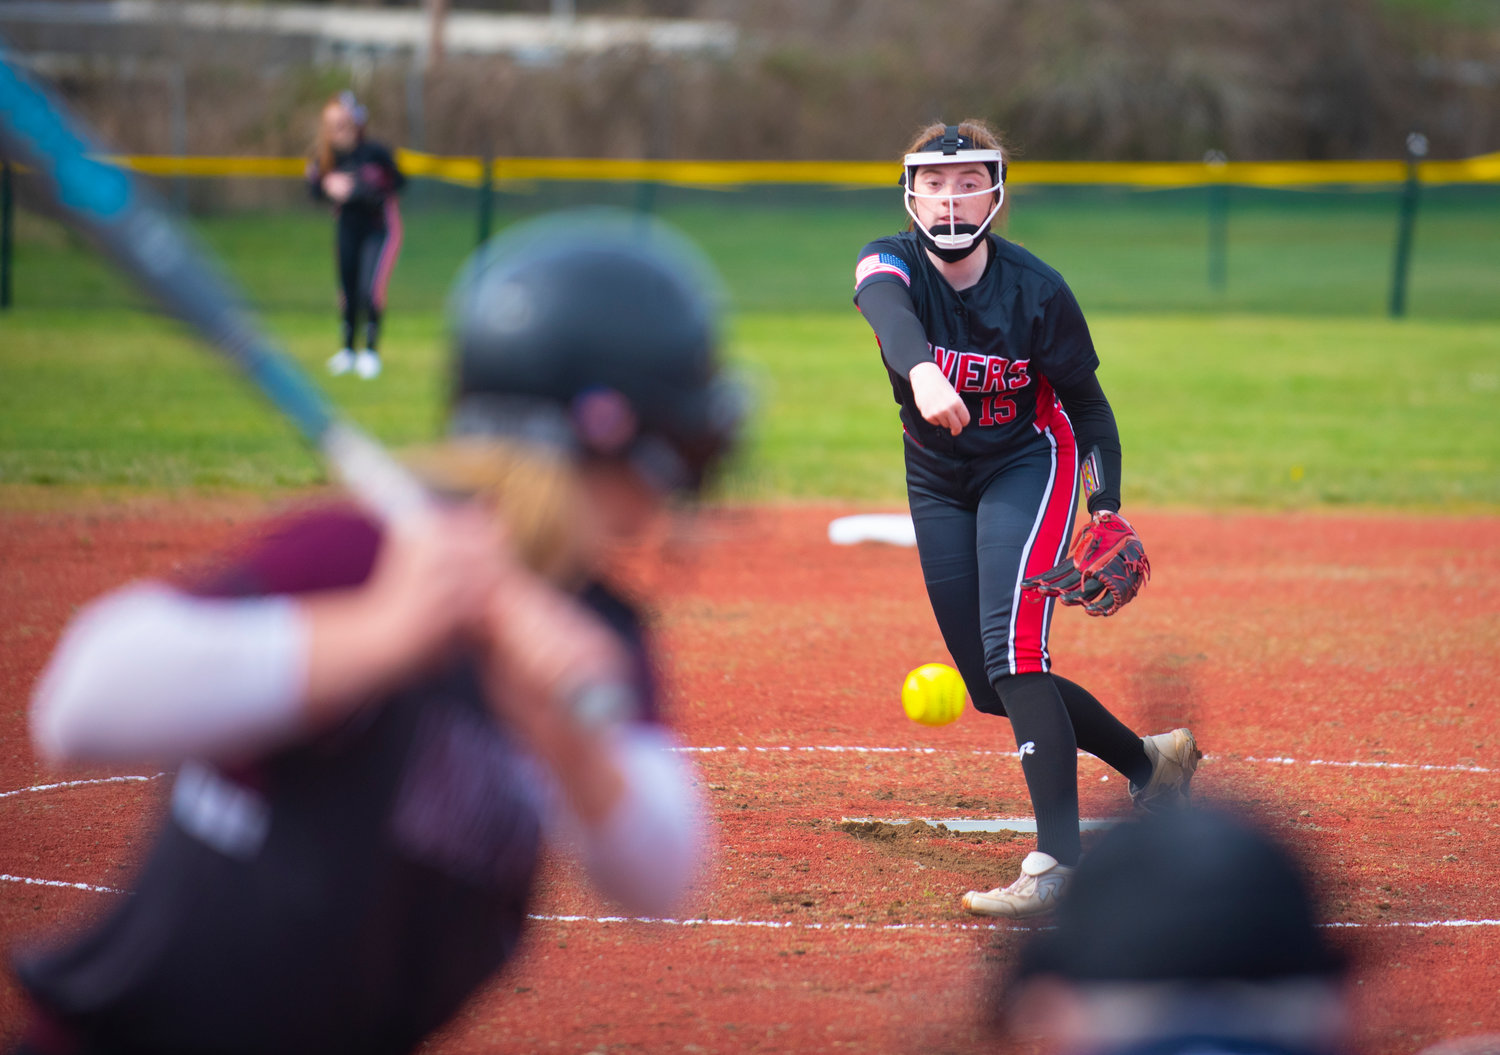 Tenino pitcher Emily Baxter delivers a pitch to a Montesano batter in the first inning of a game Friday in Tenino.